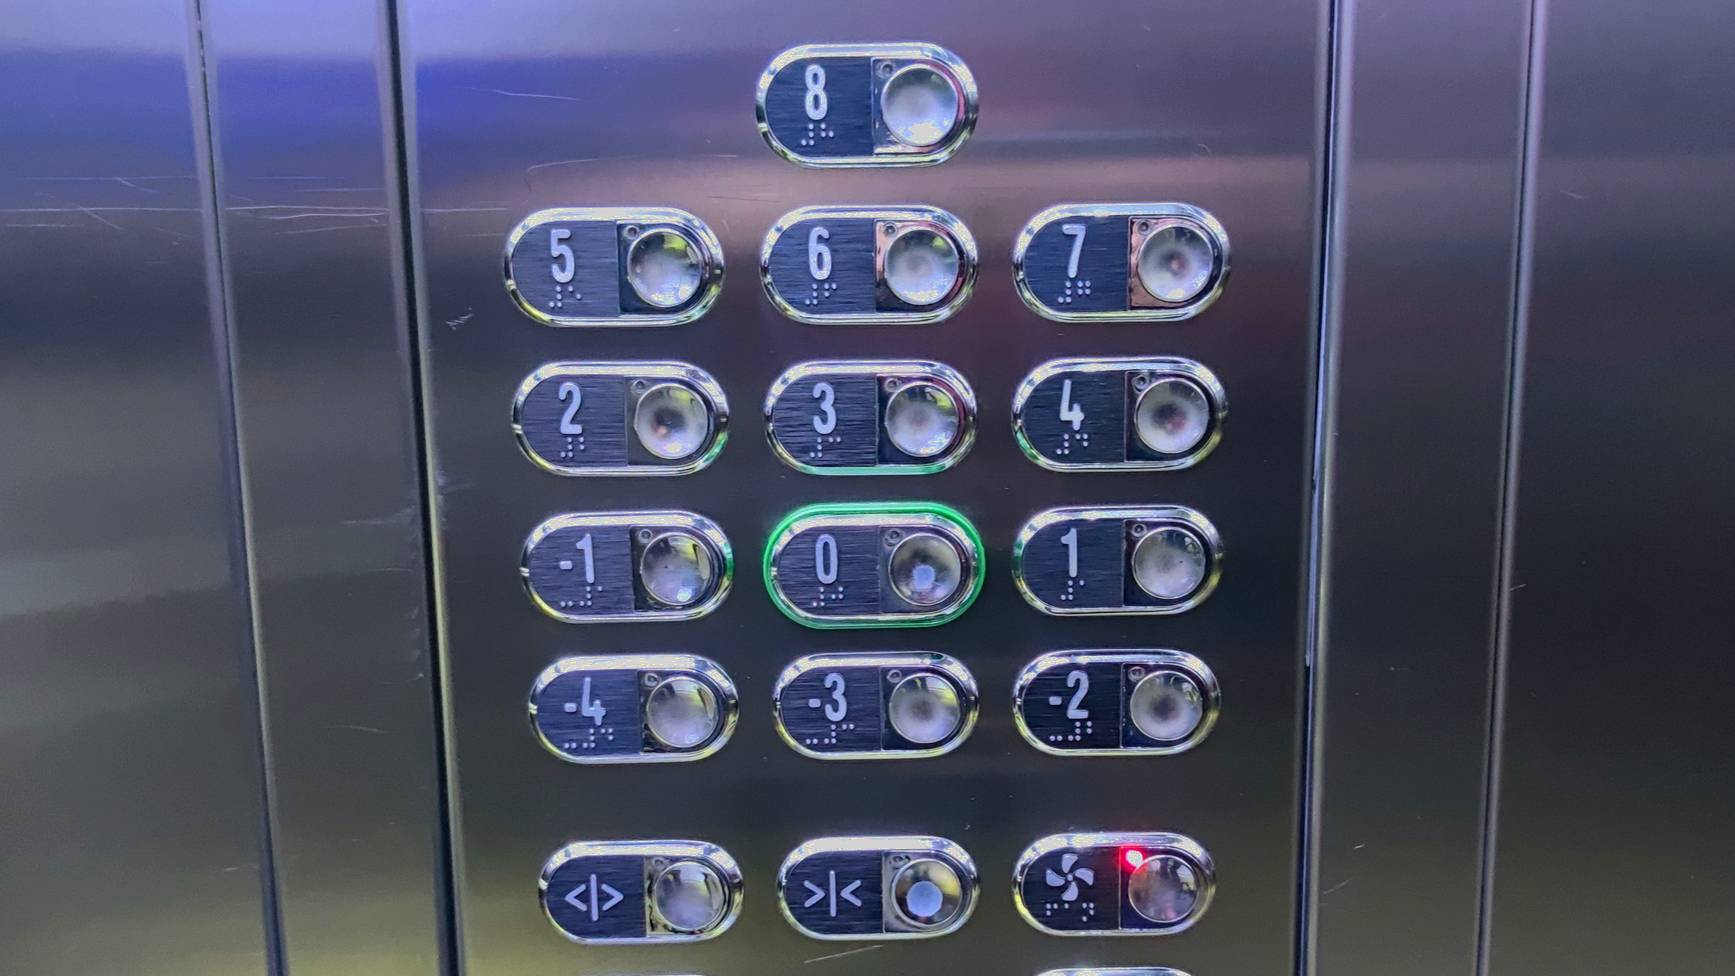 numbered elevator buttons